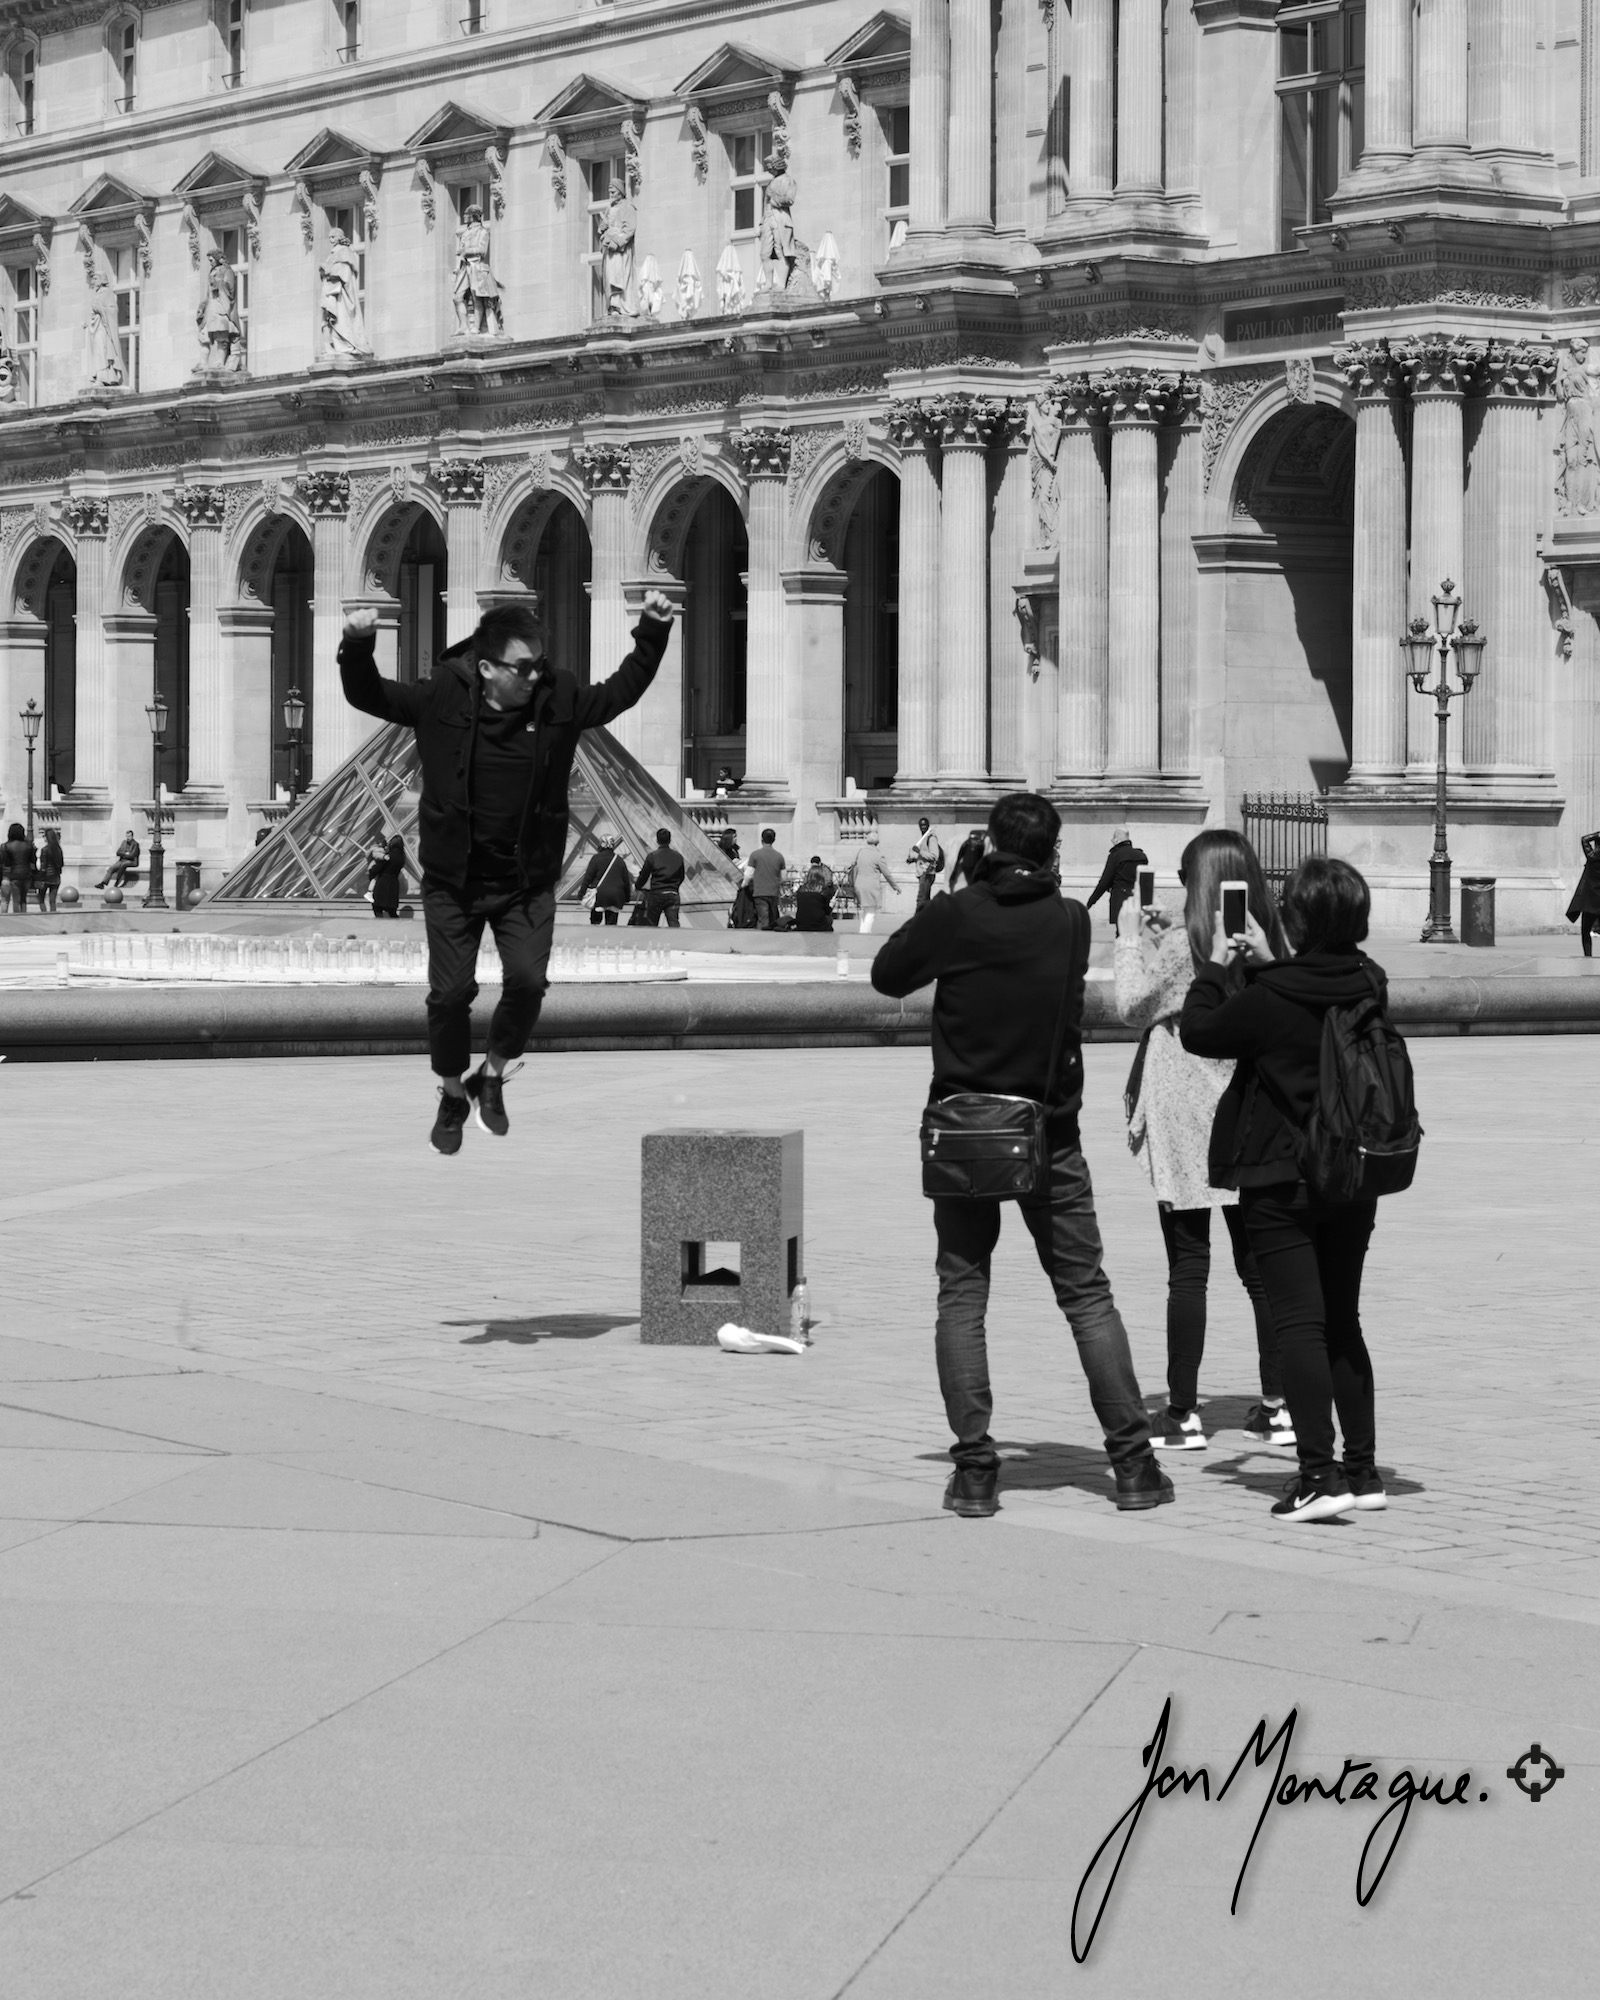 "Jump" at the Louvre